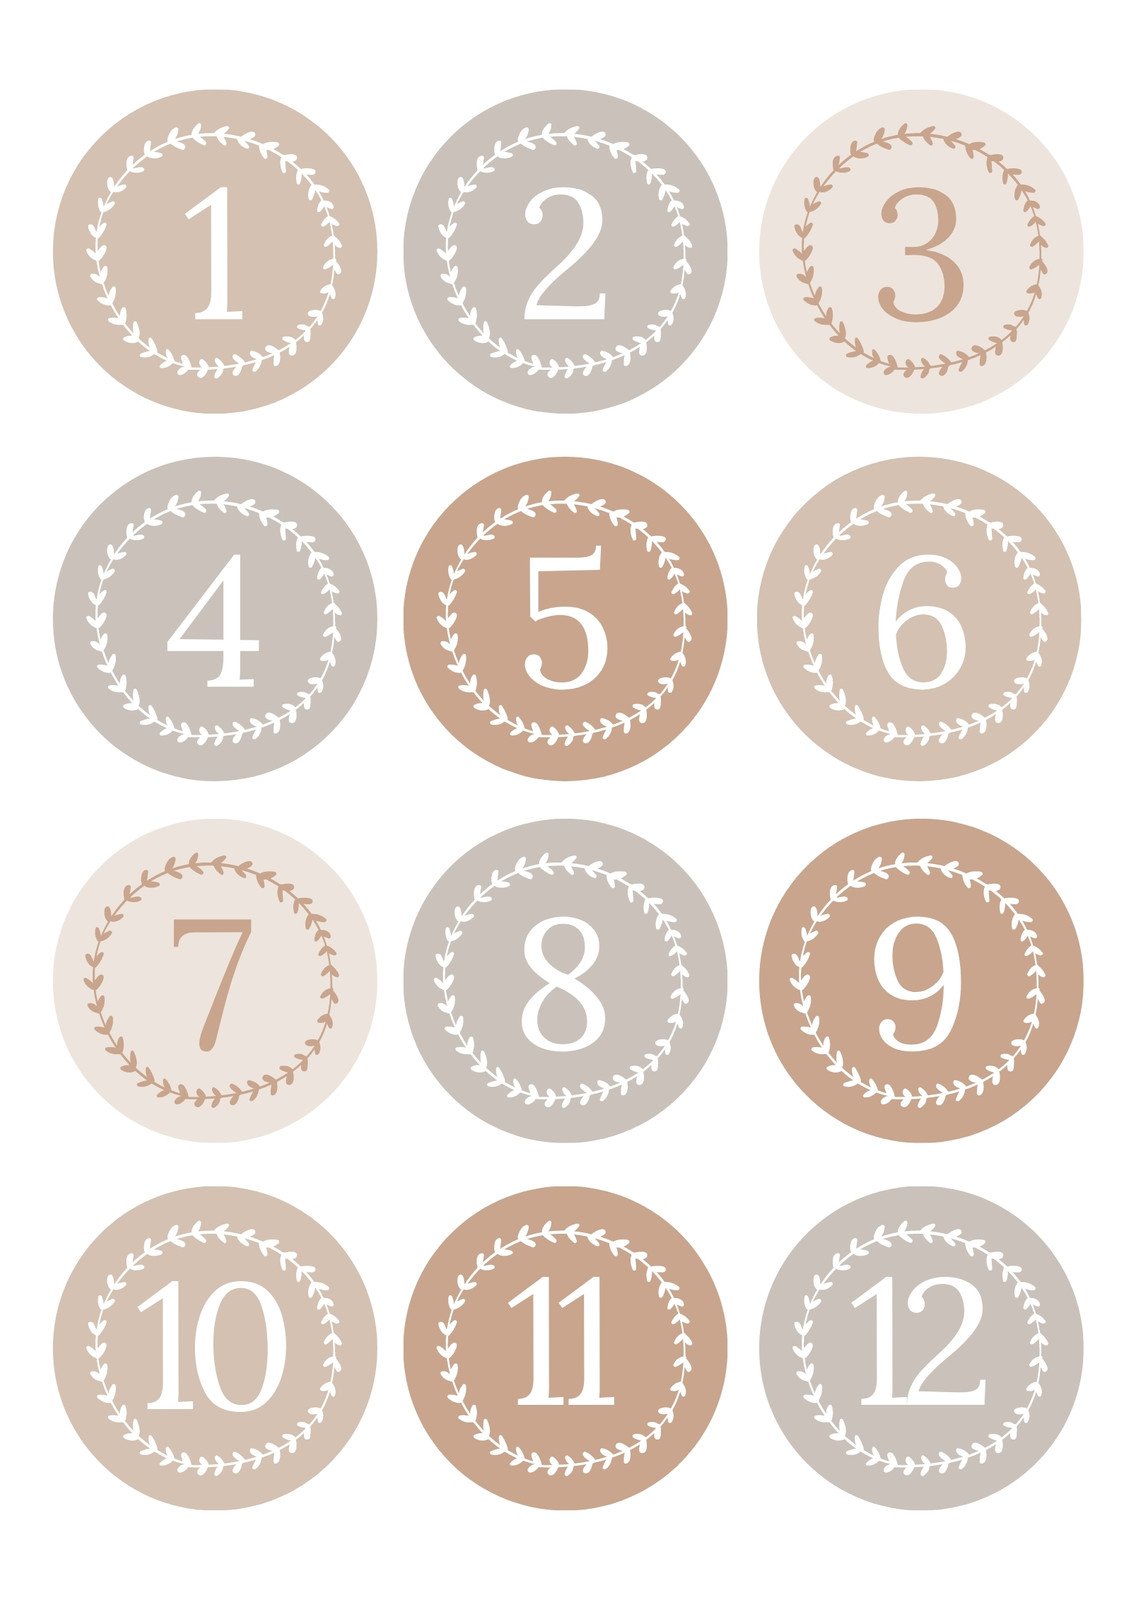 6 Best Images of Paint By Number Printable Templates - Free   Paint by  number, Free stencils printables, Templates printable free